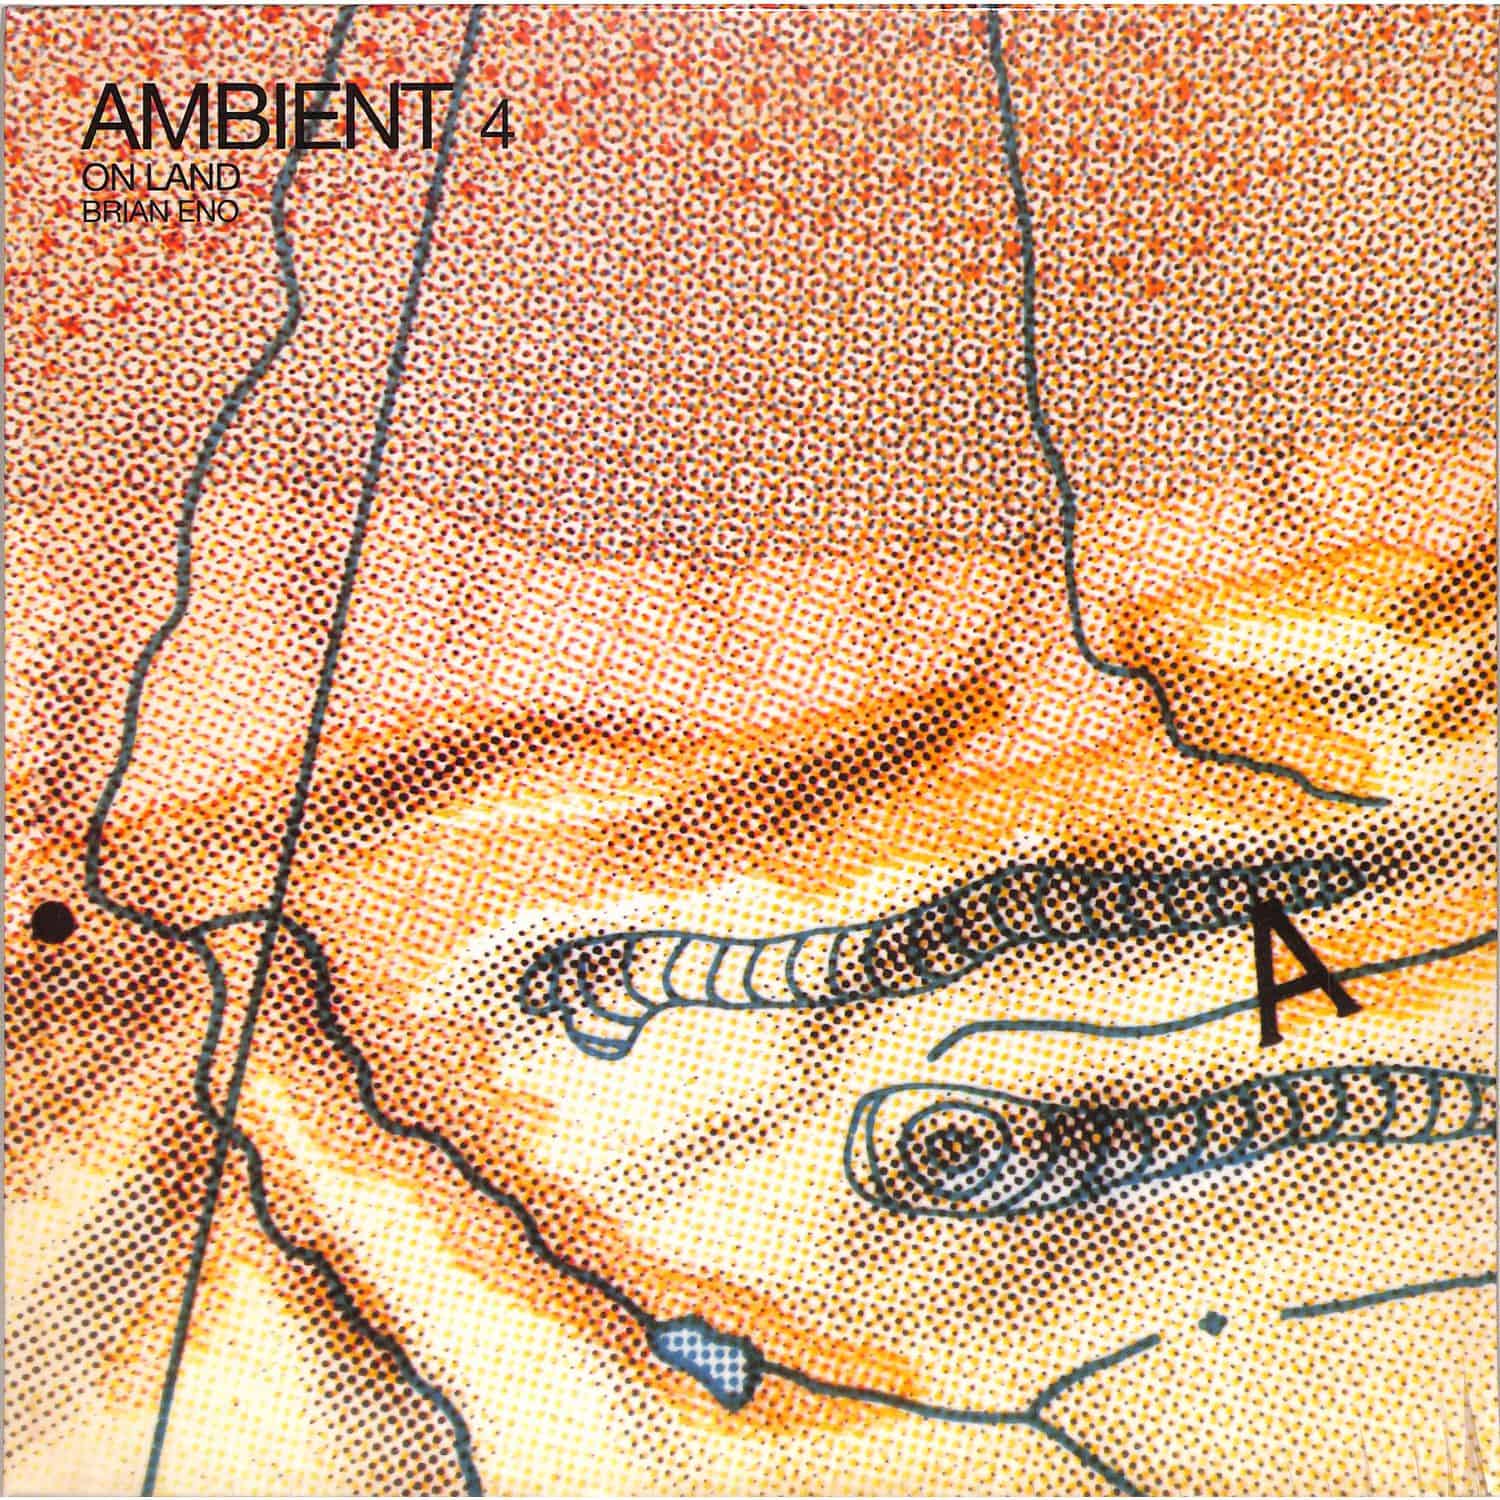 Brian Eno - AMBIENT 4: ON LAND 